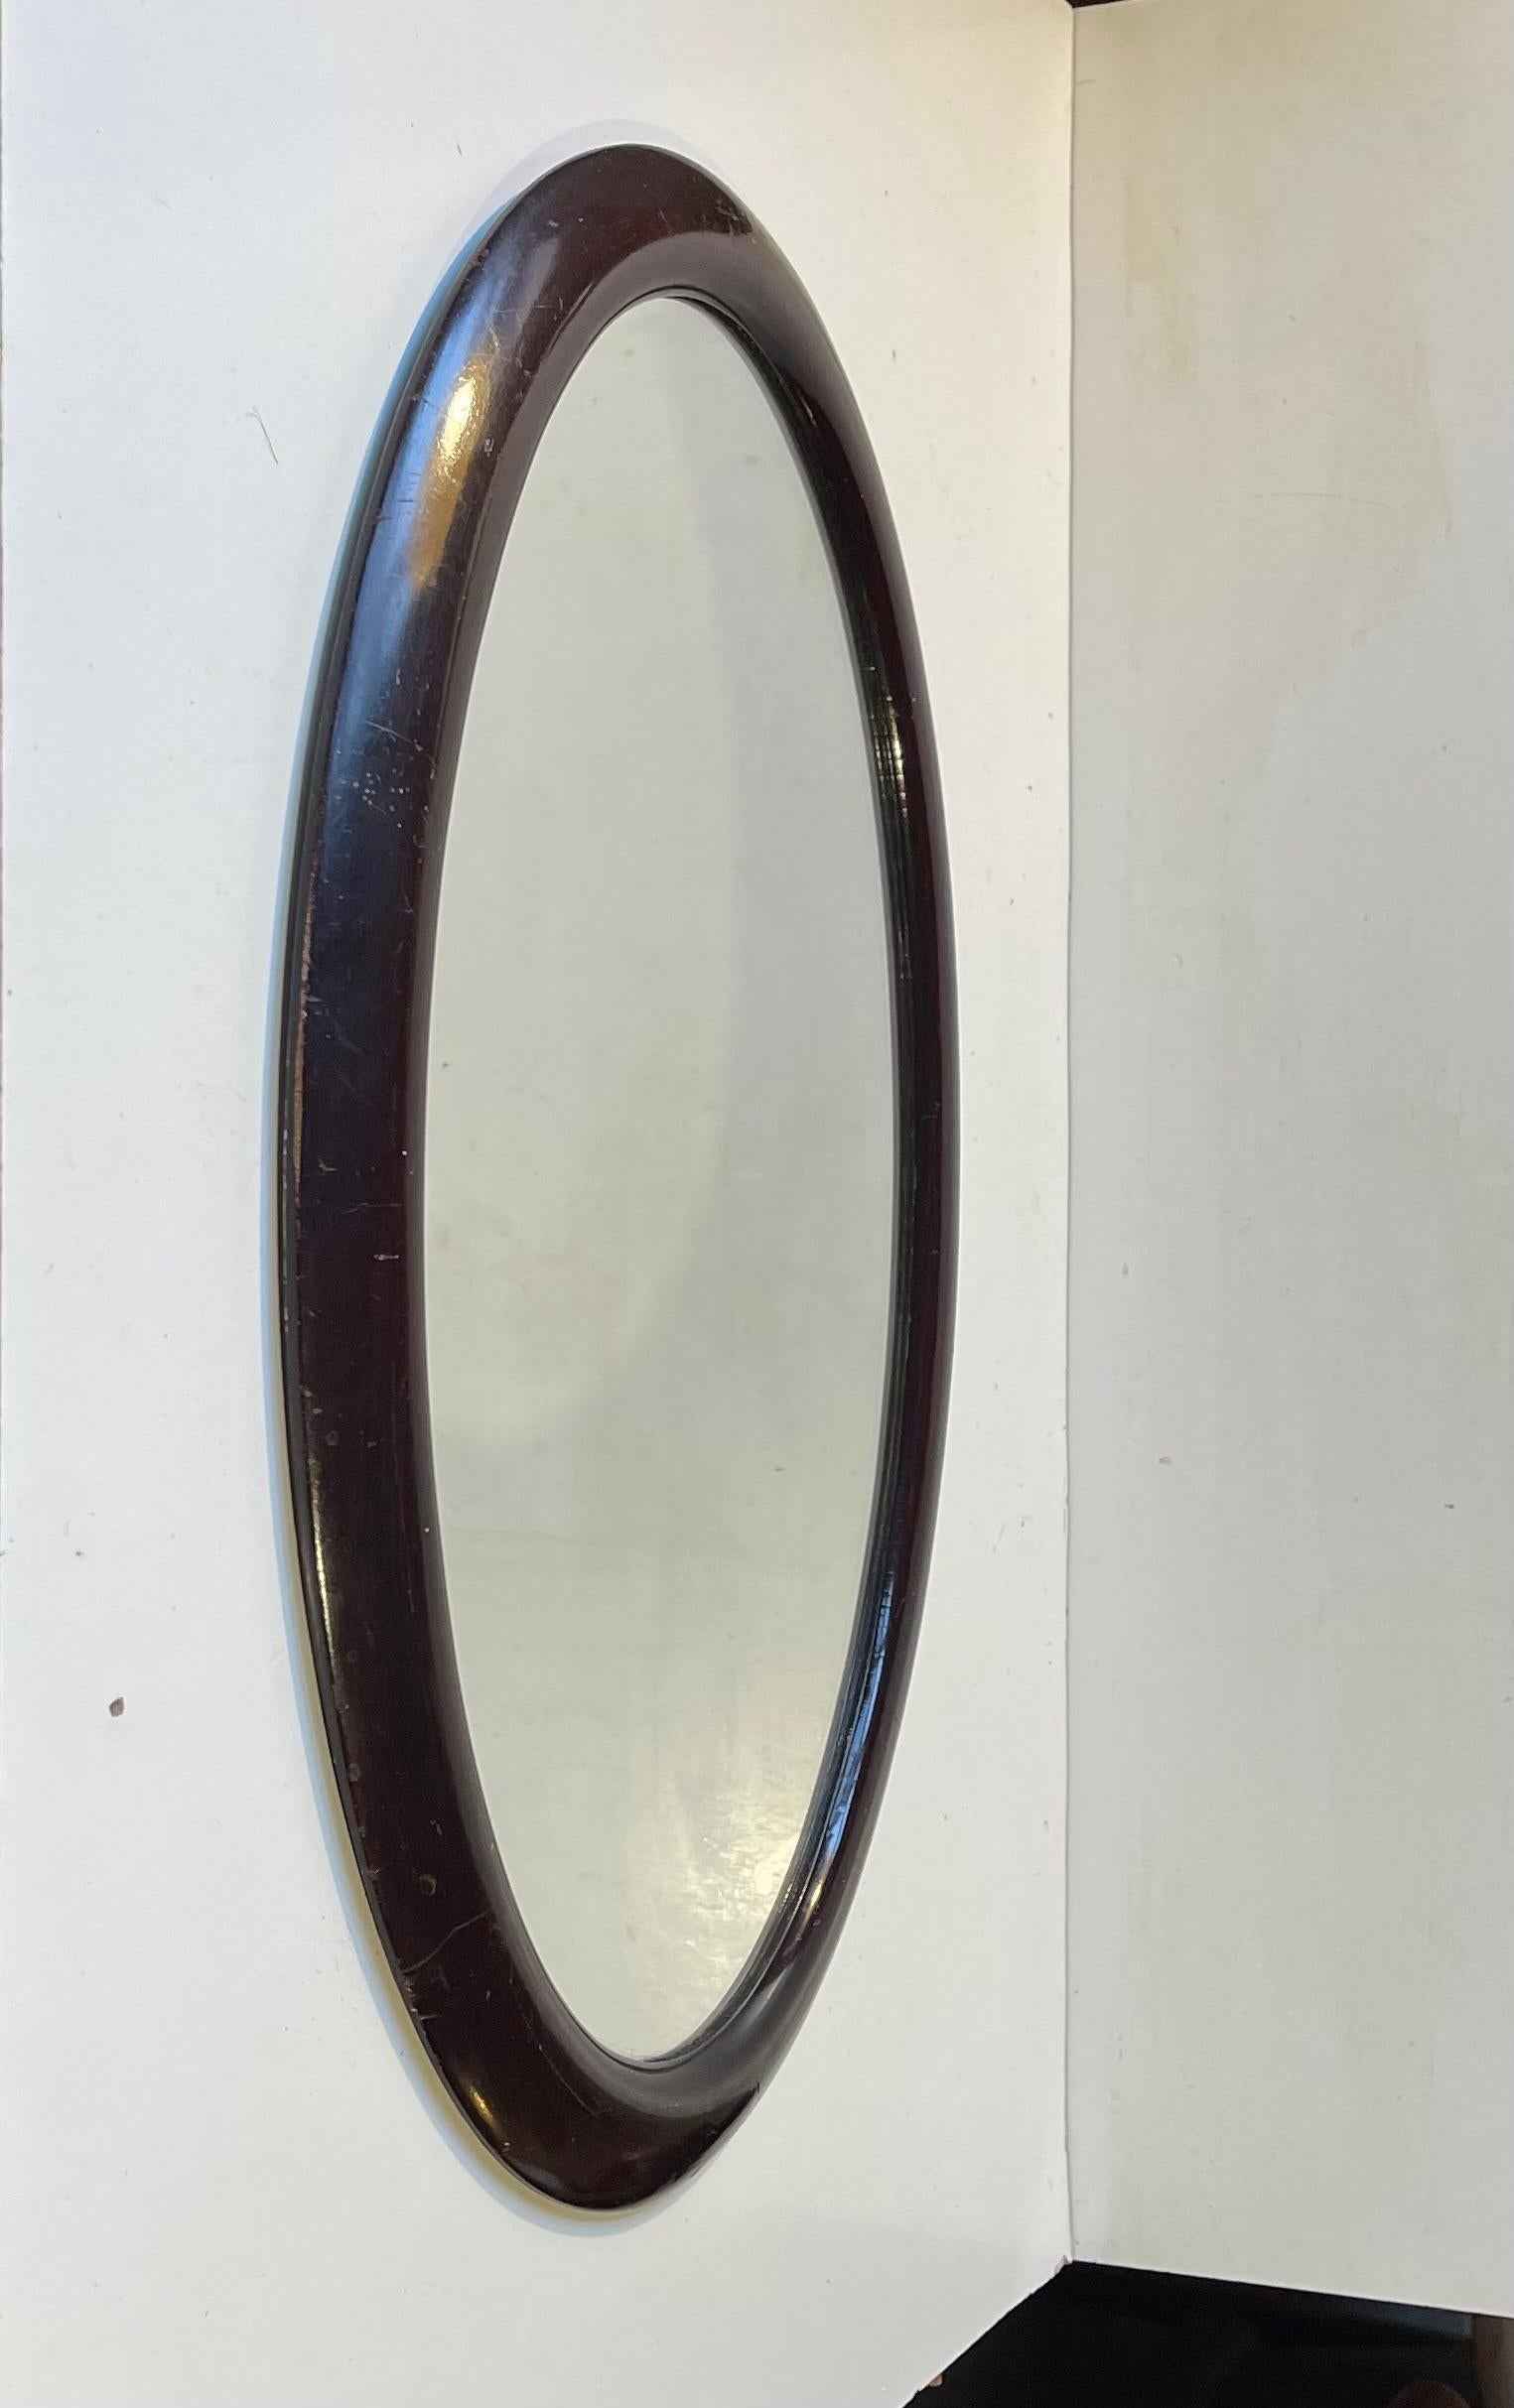 A bend-wood wall mirror in stained oak (dark mahogany tone). Clean curves and simple lines in an oval shape. Made by a Danish cabinetmaker during the early 1920s. Measurements: 49x33x3 cm in framed.